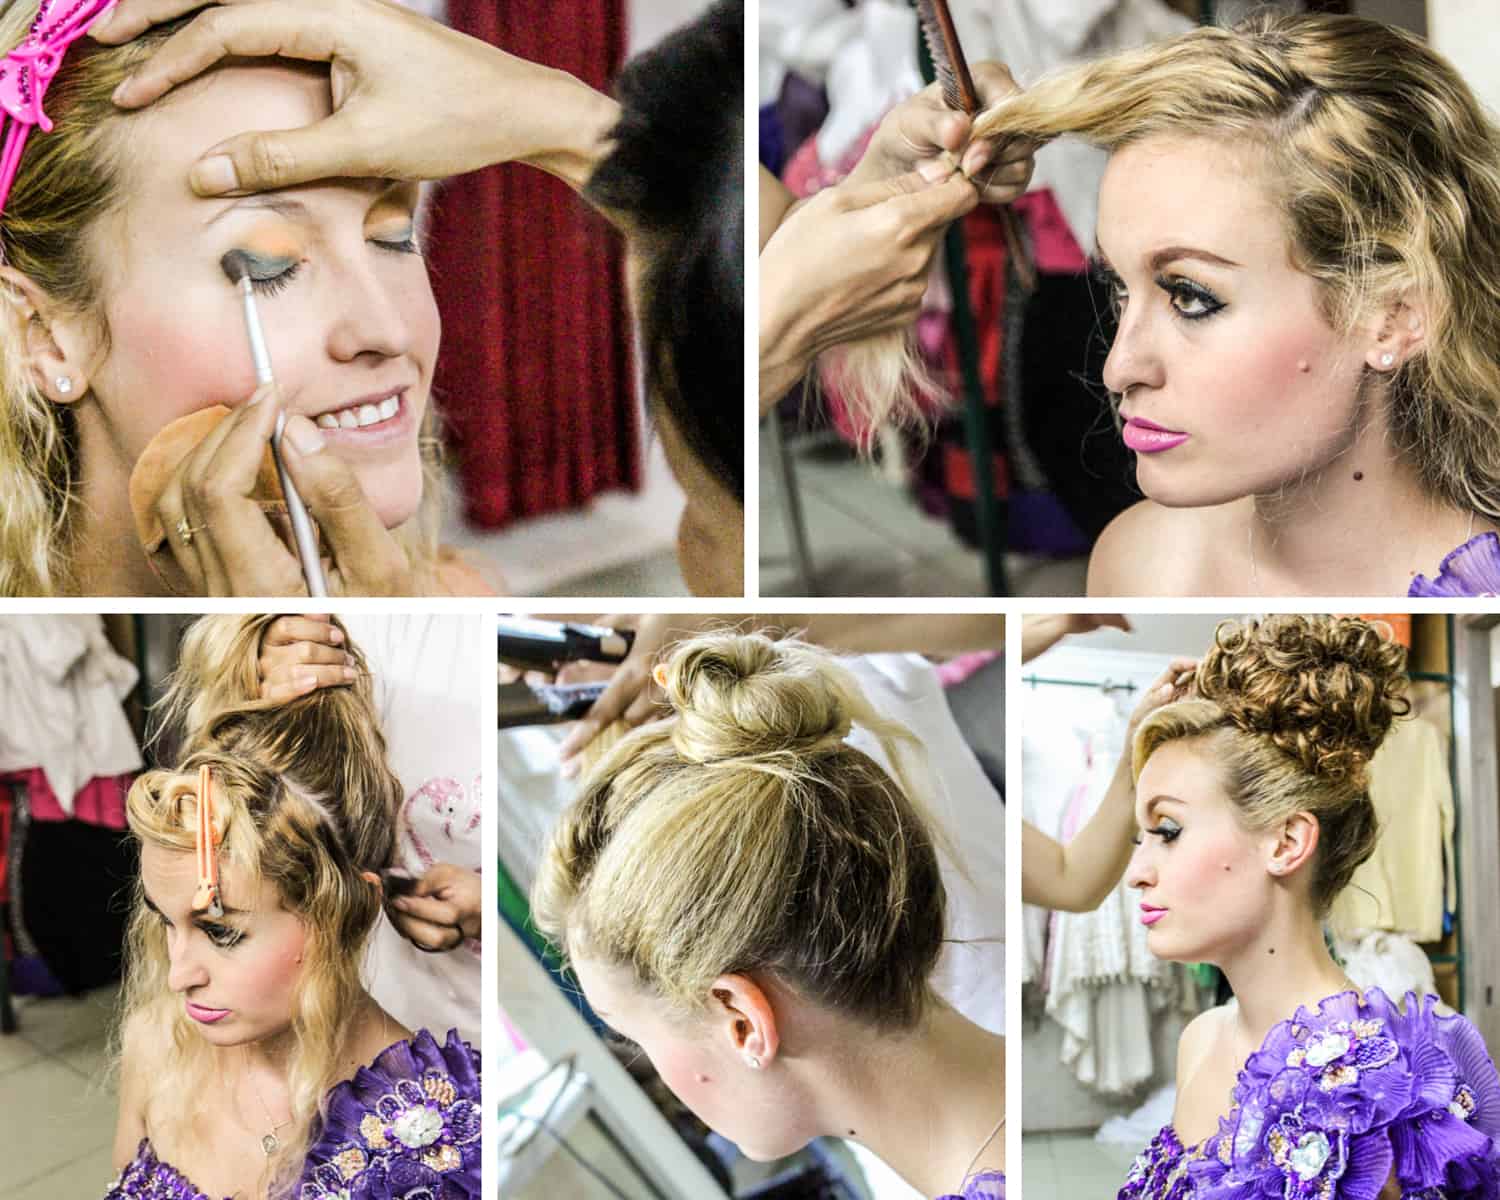 Five images showing a blonde woman in a purple dress having her hair and make up done at a traditional Cambodian photo shoot.